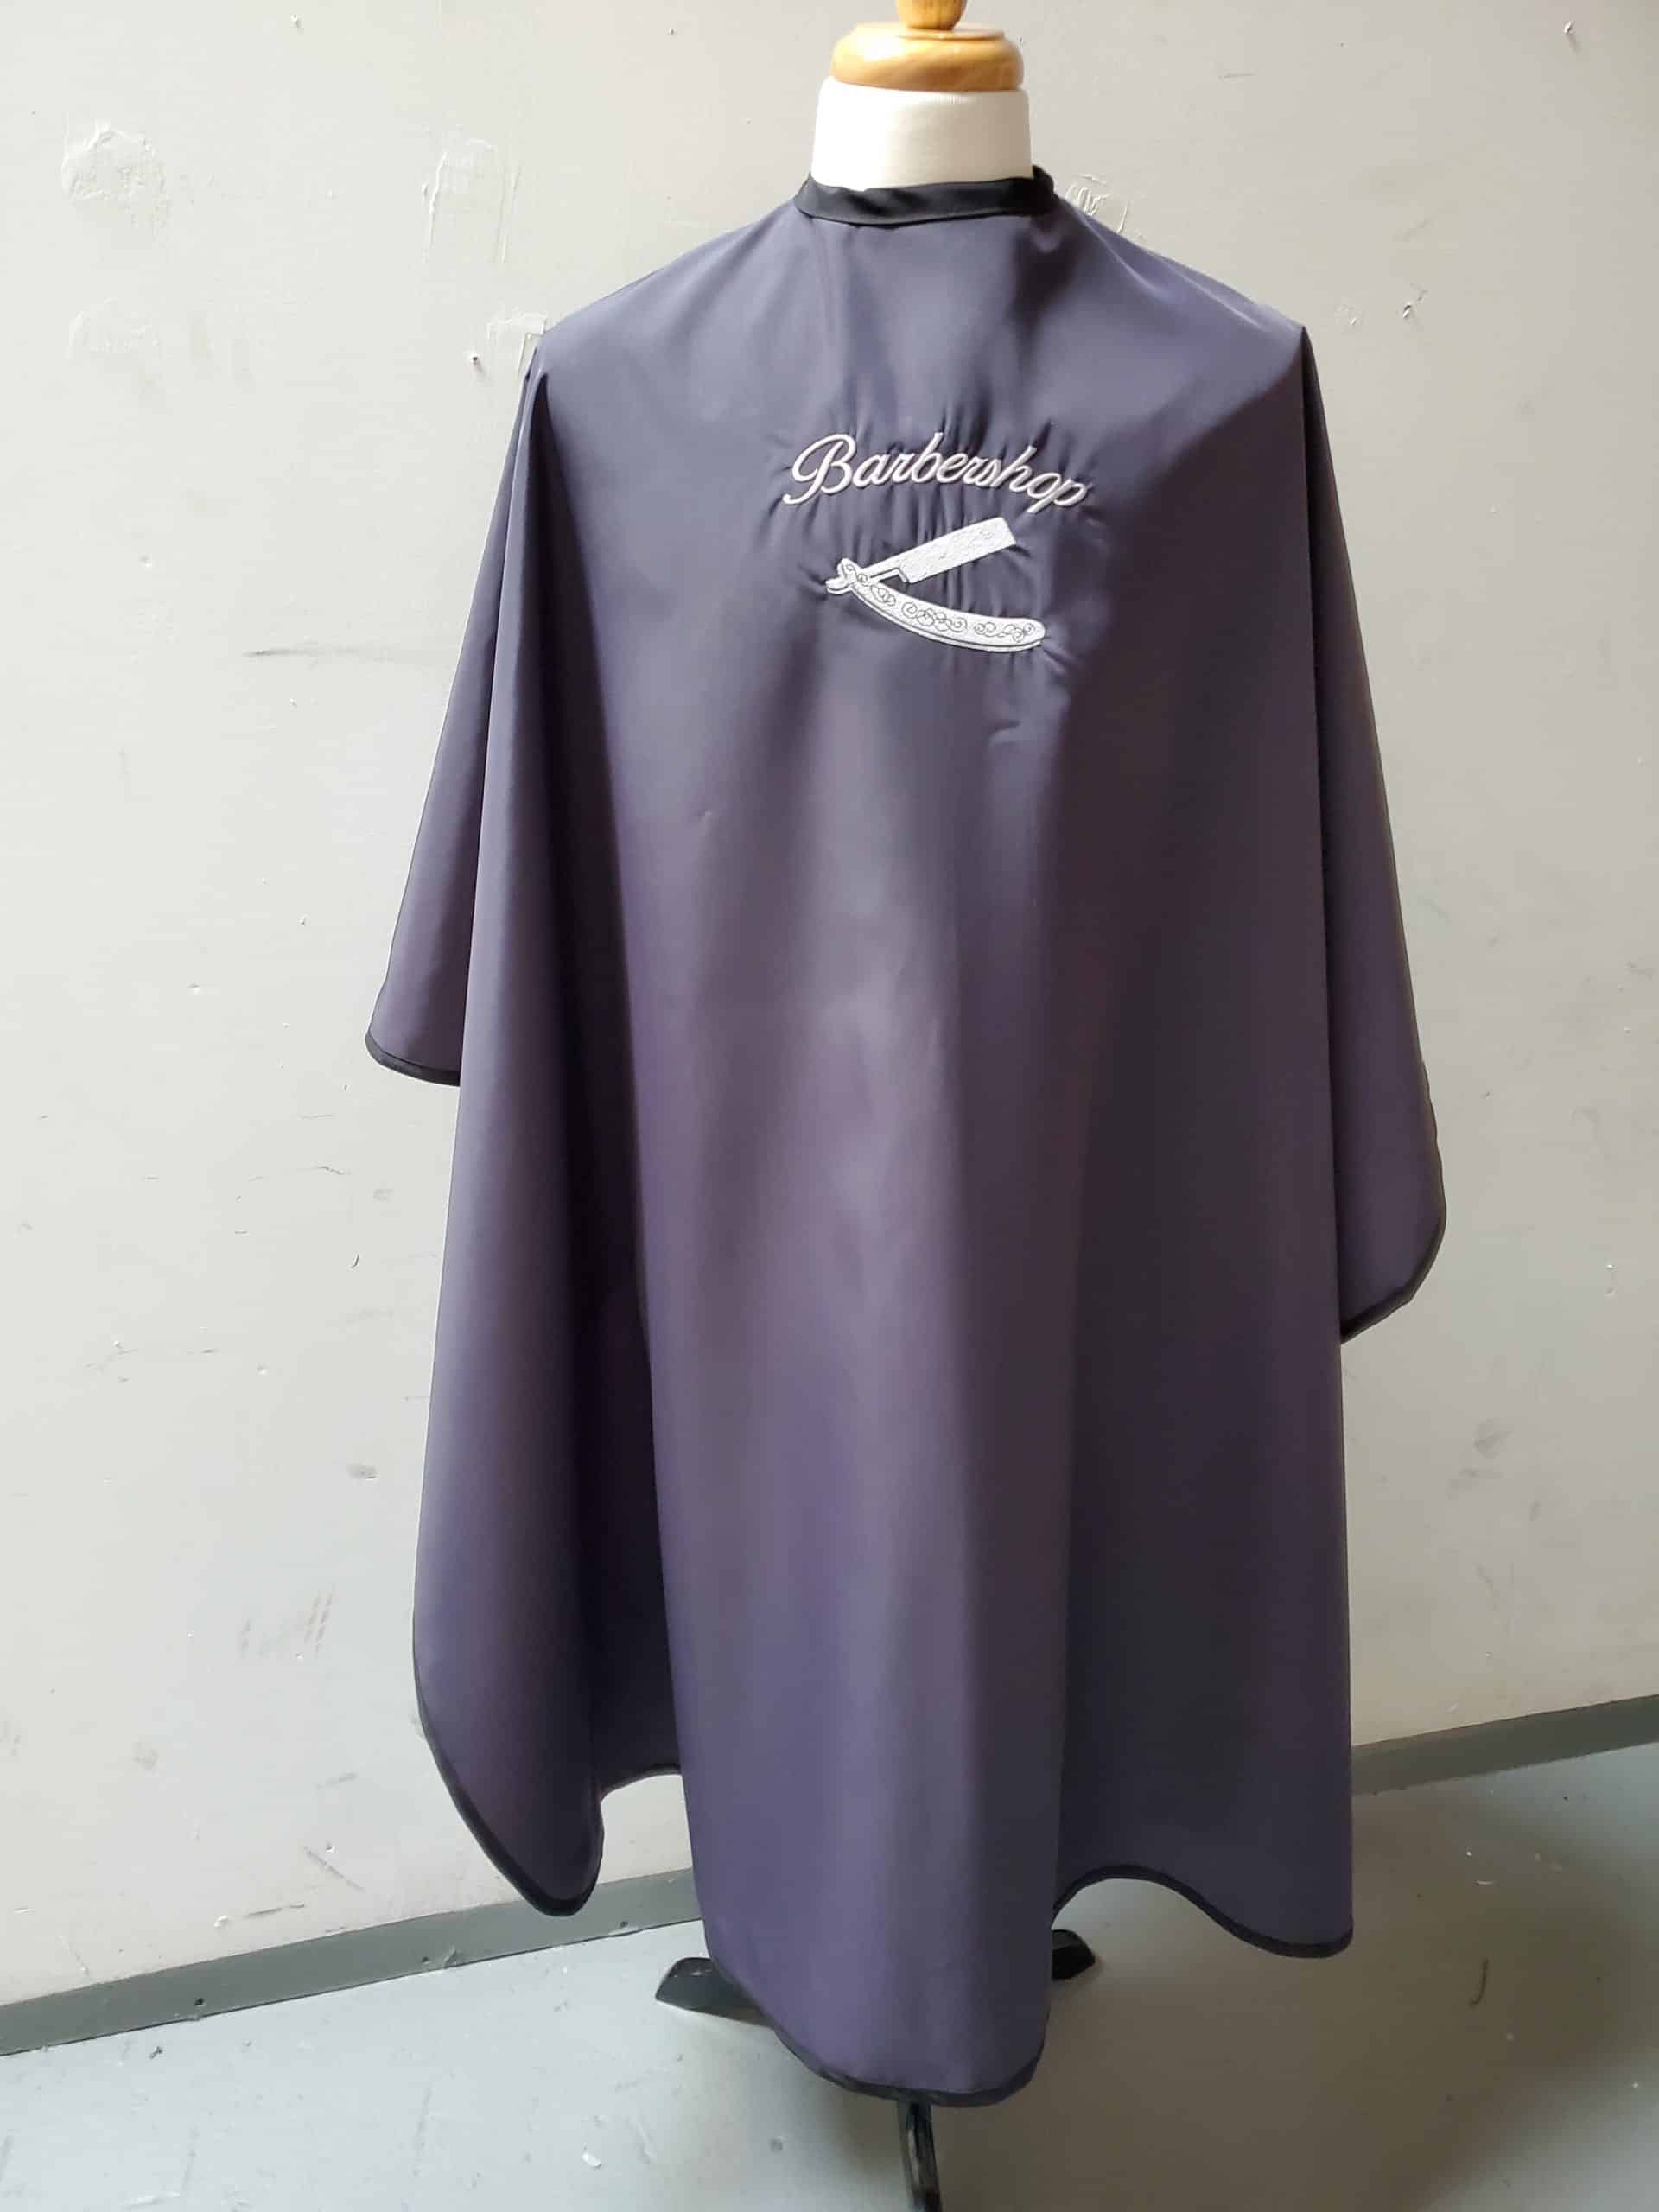 Large Barbershop cape with embroidery Style # 935